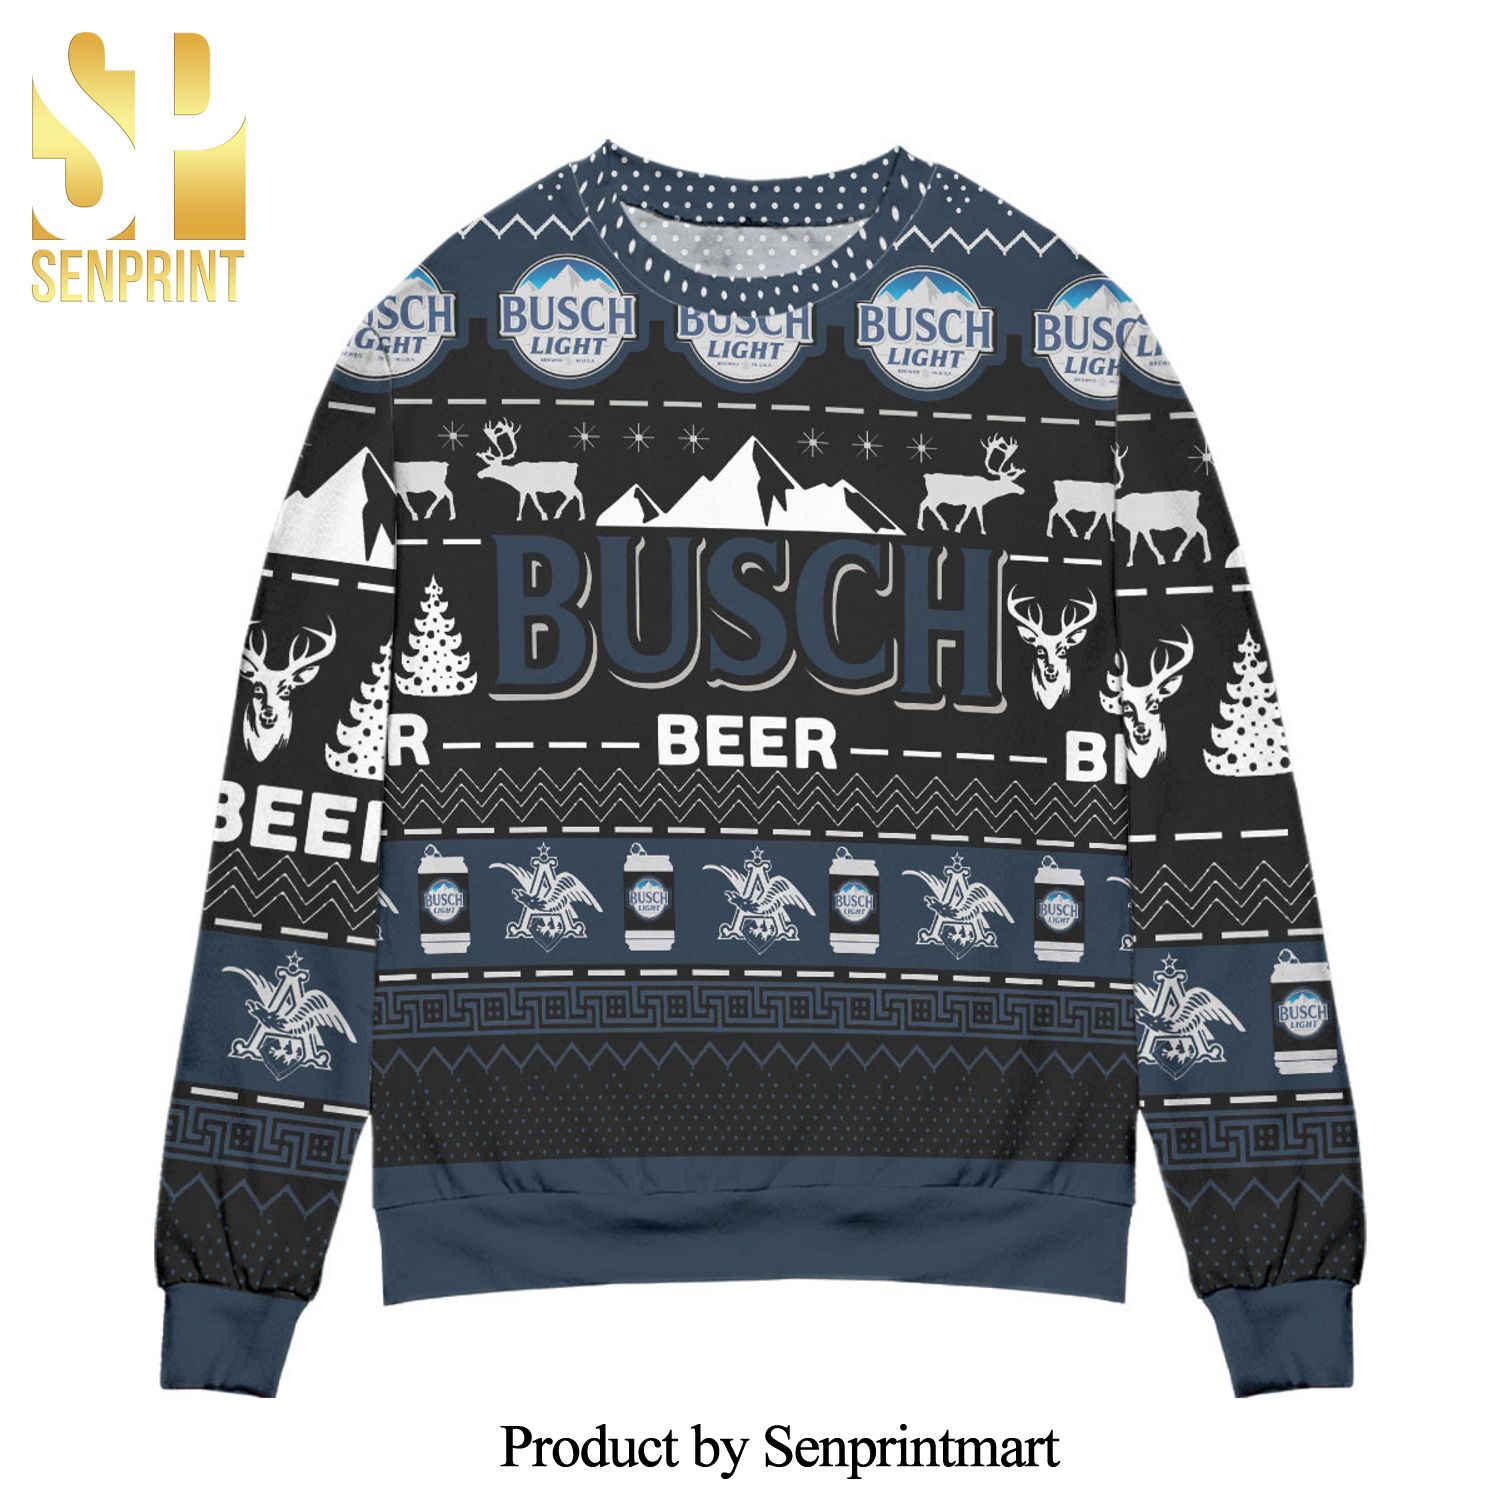 Busch Beer Reindeer Pattern Knitted Ugly Christmas Sweater – Black Navy